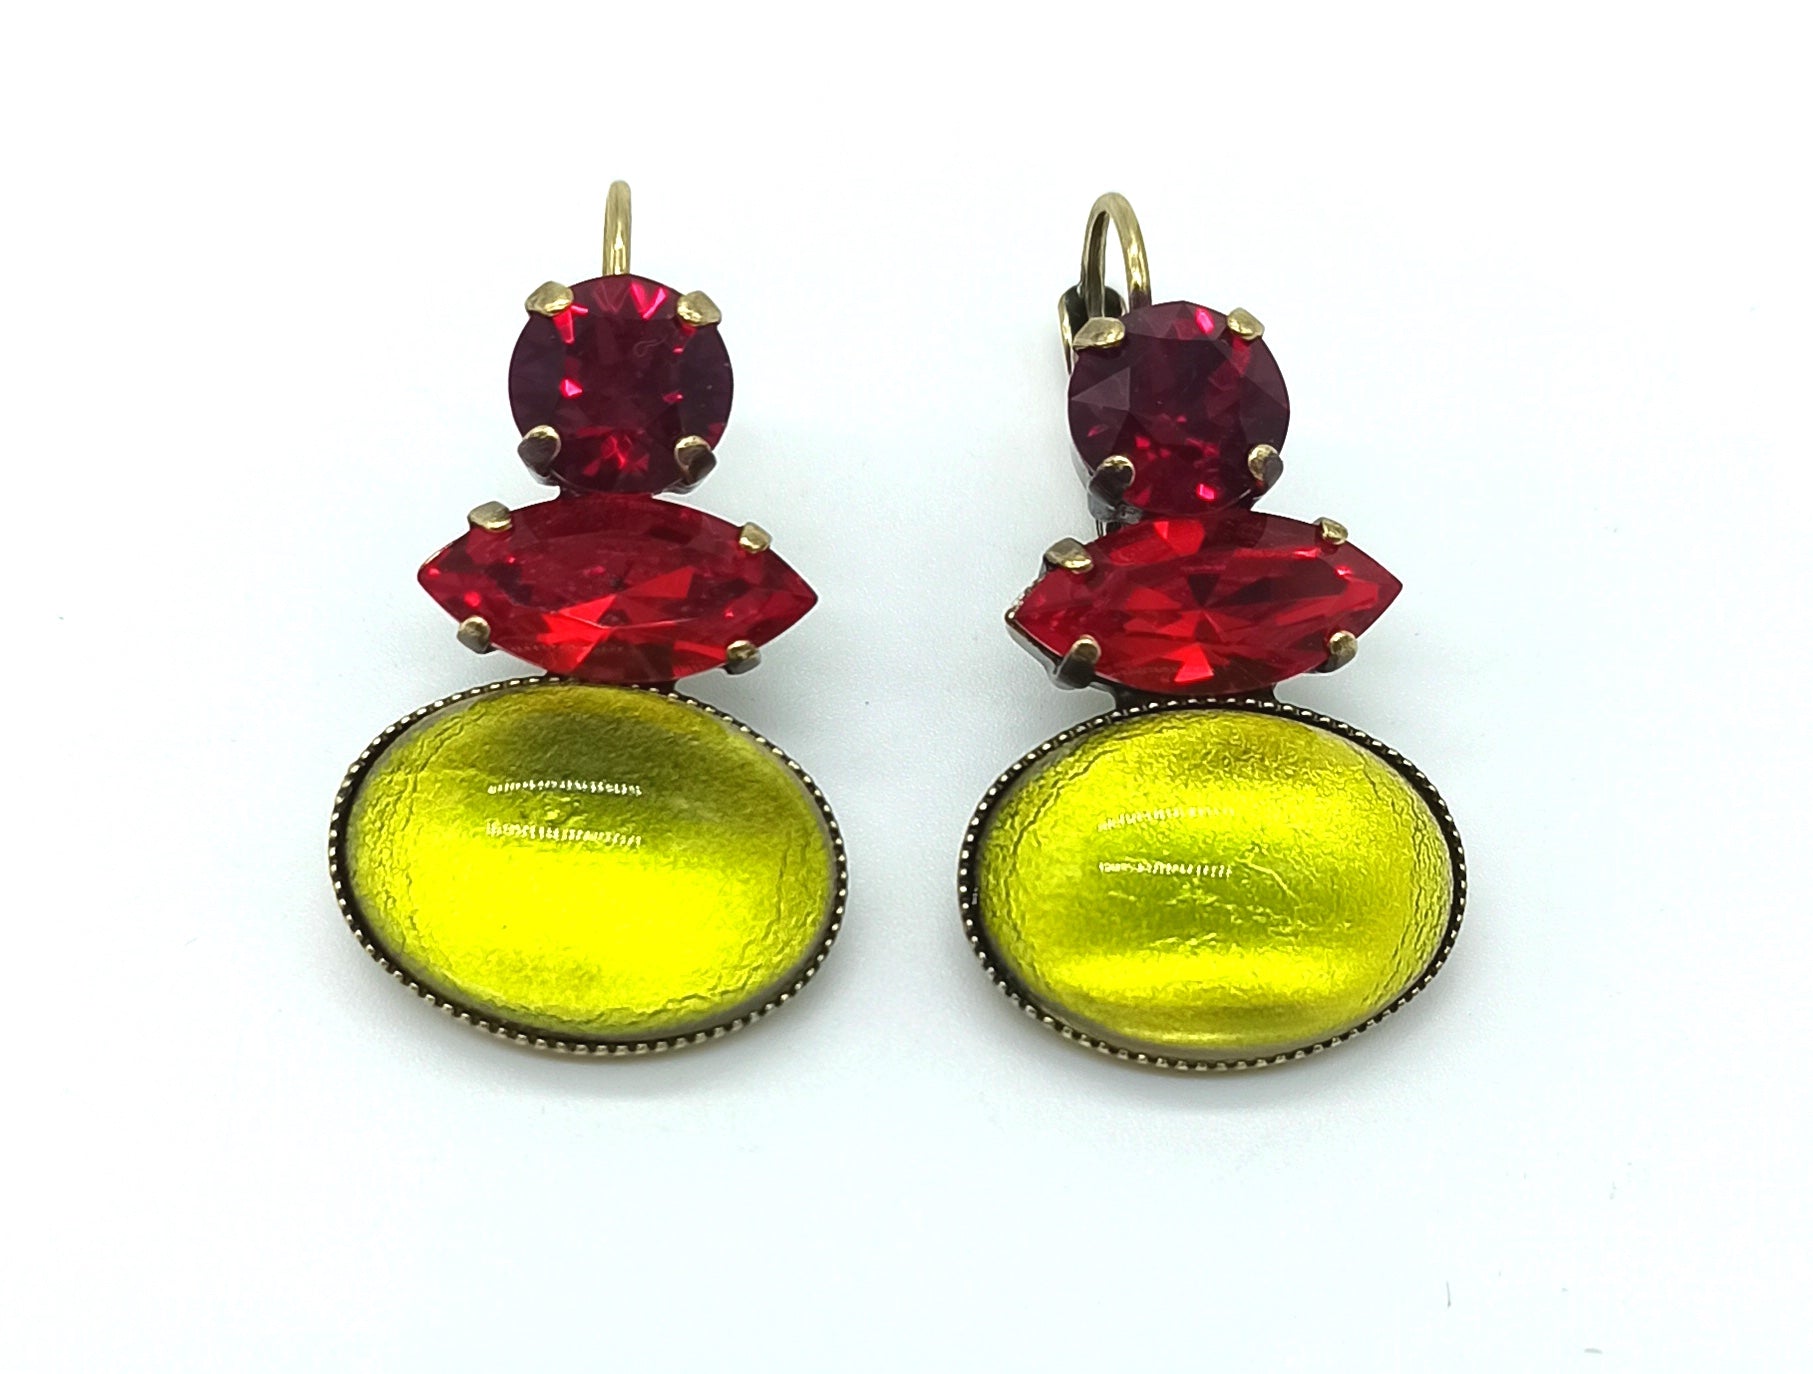 Triple earrings / red and yellow